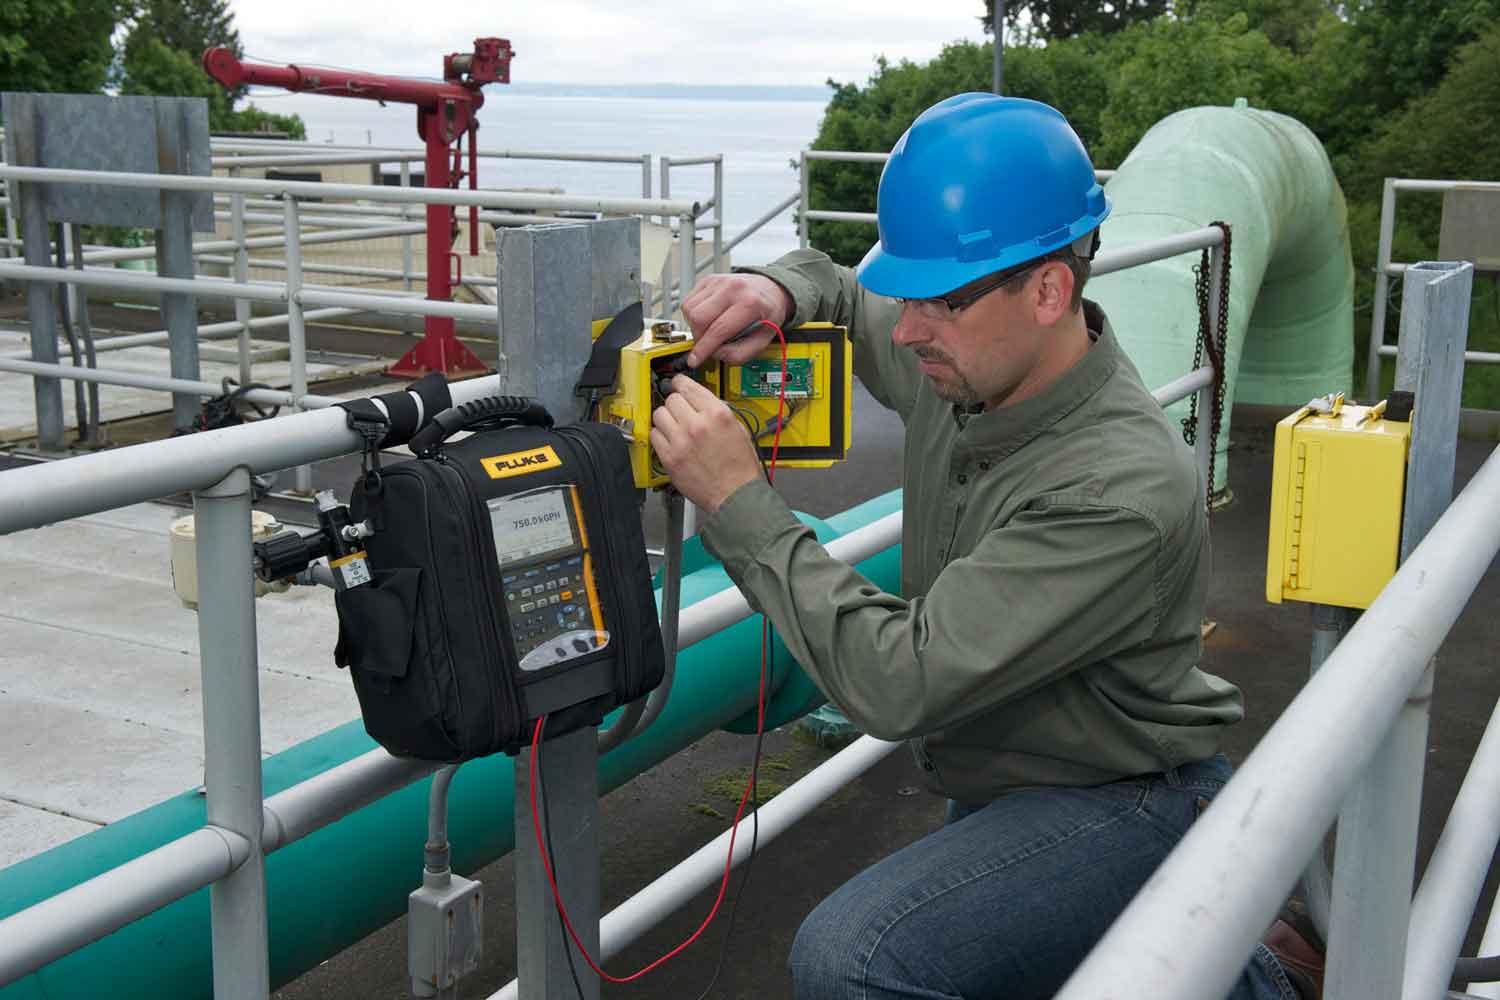 The Fluke 754 Documenting Process Calibrator Used by a Technician at a Plant